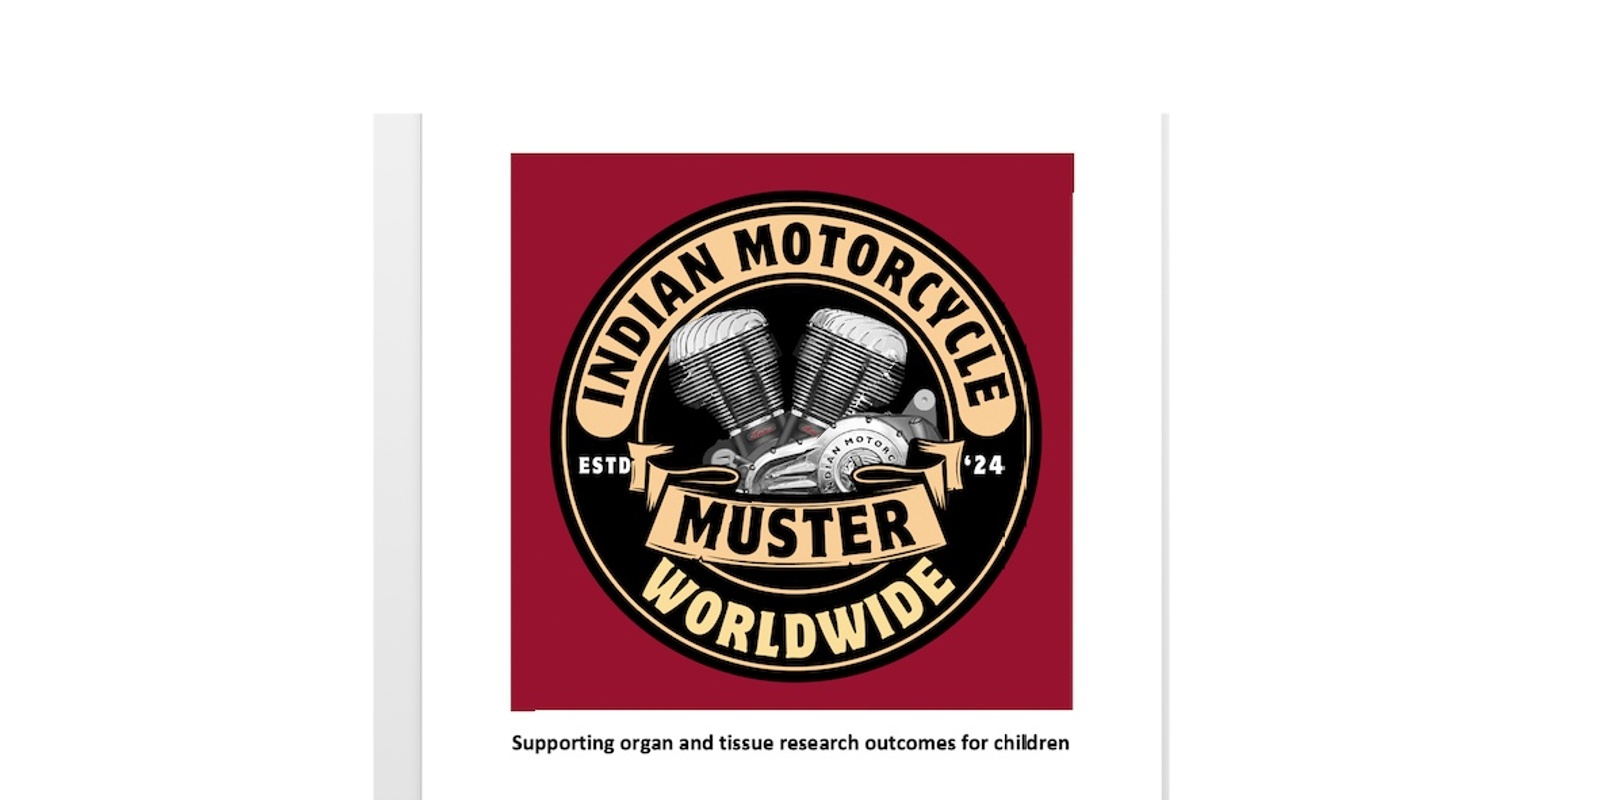 Banner image for Indian Motorcycle Muster World Wide Ride